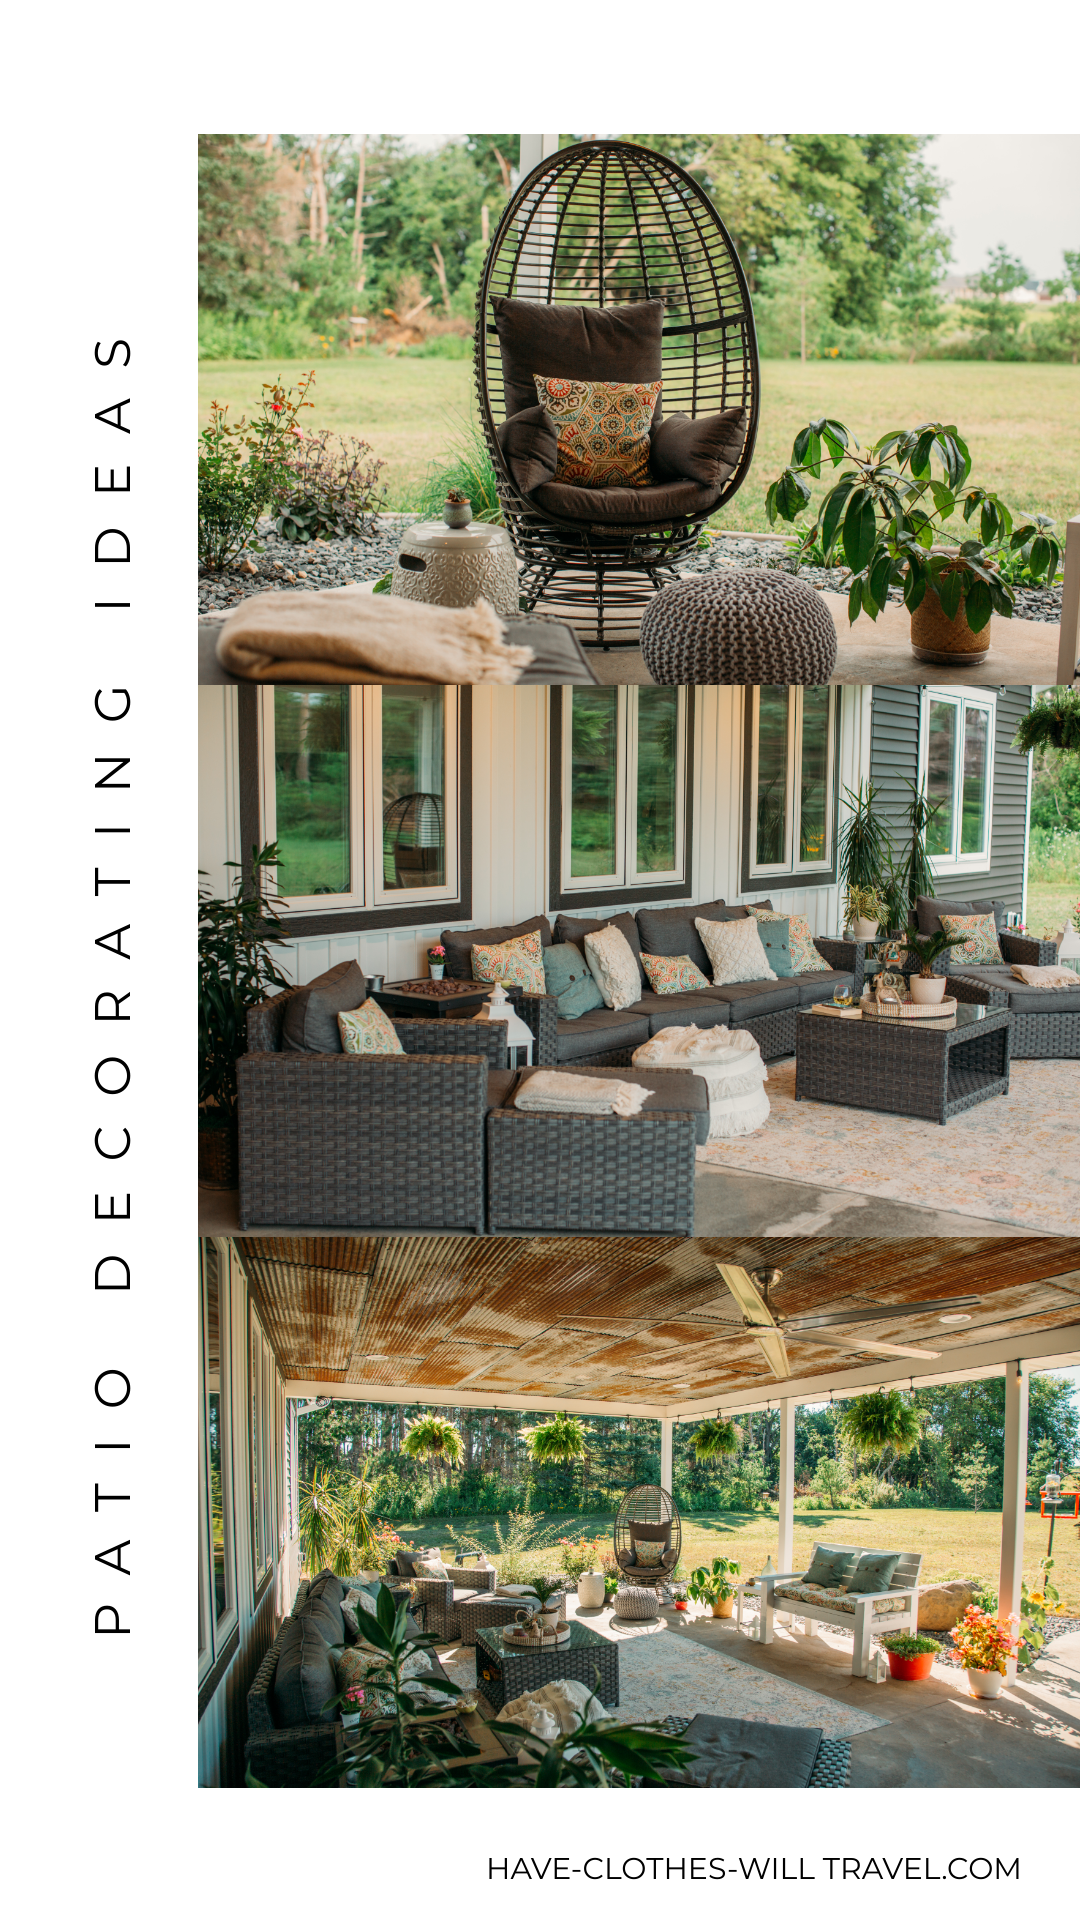 A collage of three images showing furniture and decor on a backyard patio space. Text on the side of the image reads, "Patio Decorating Ideas"